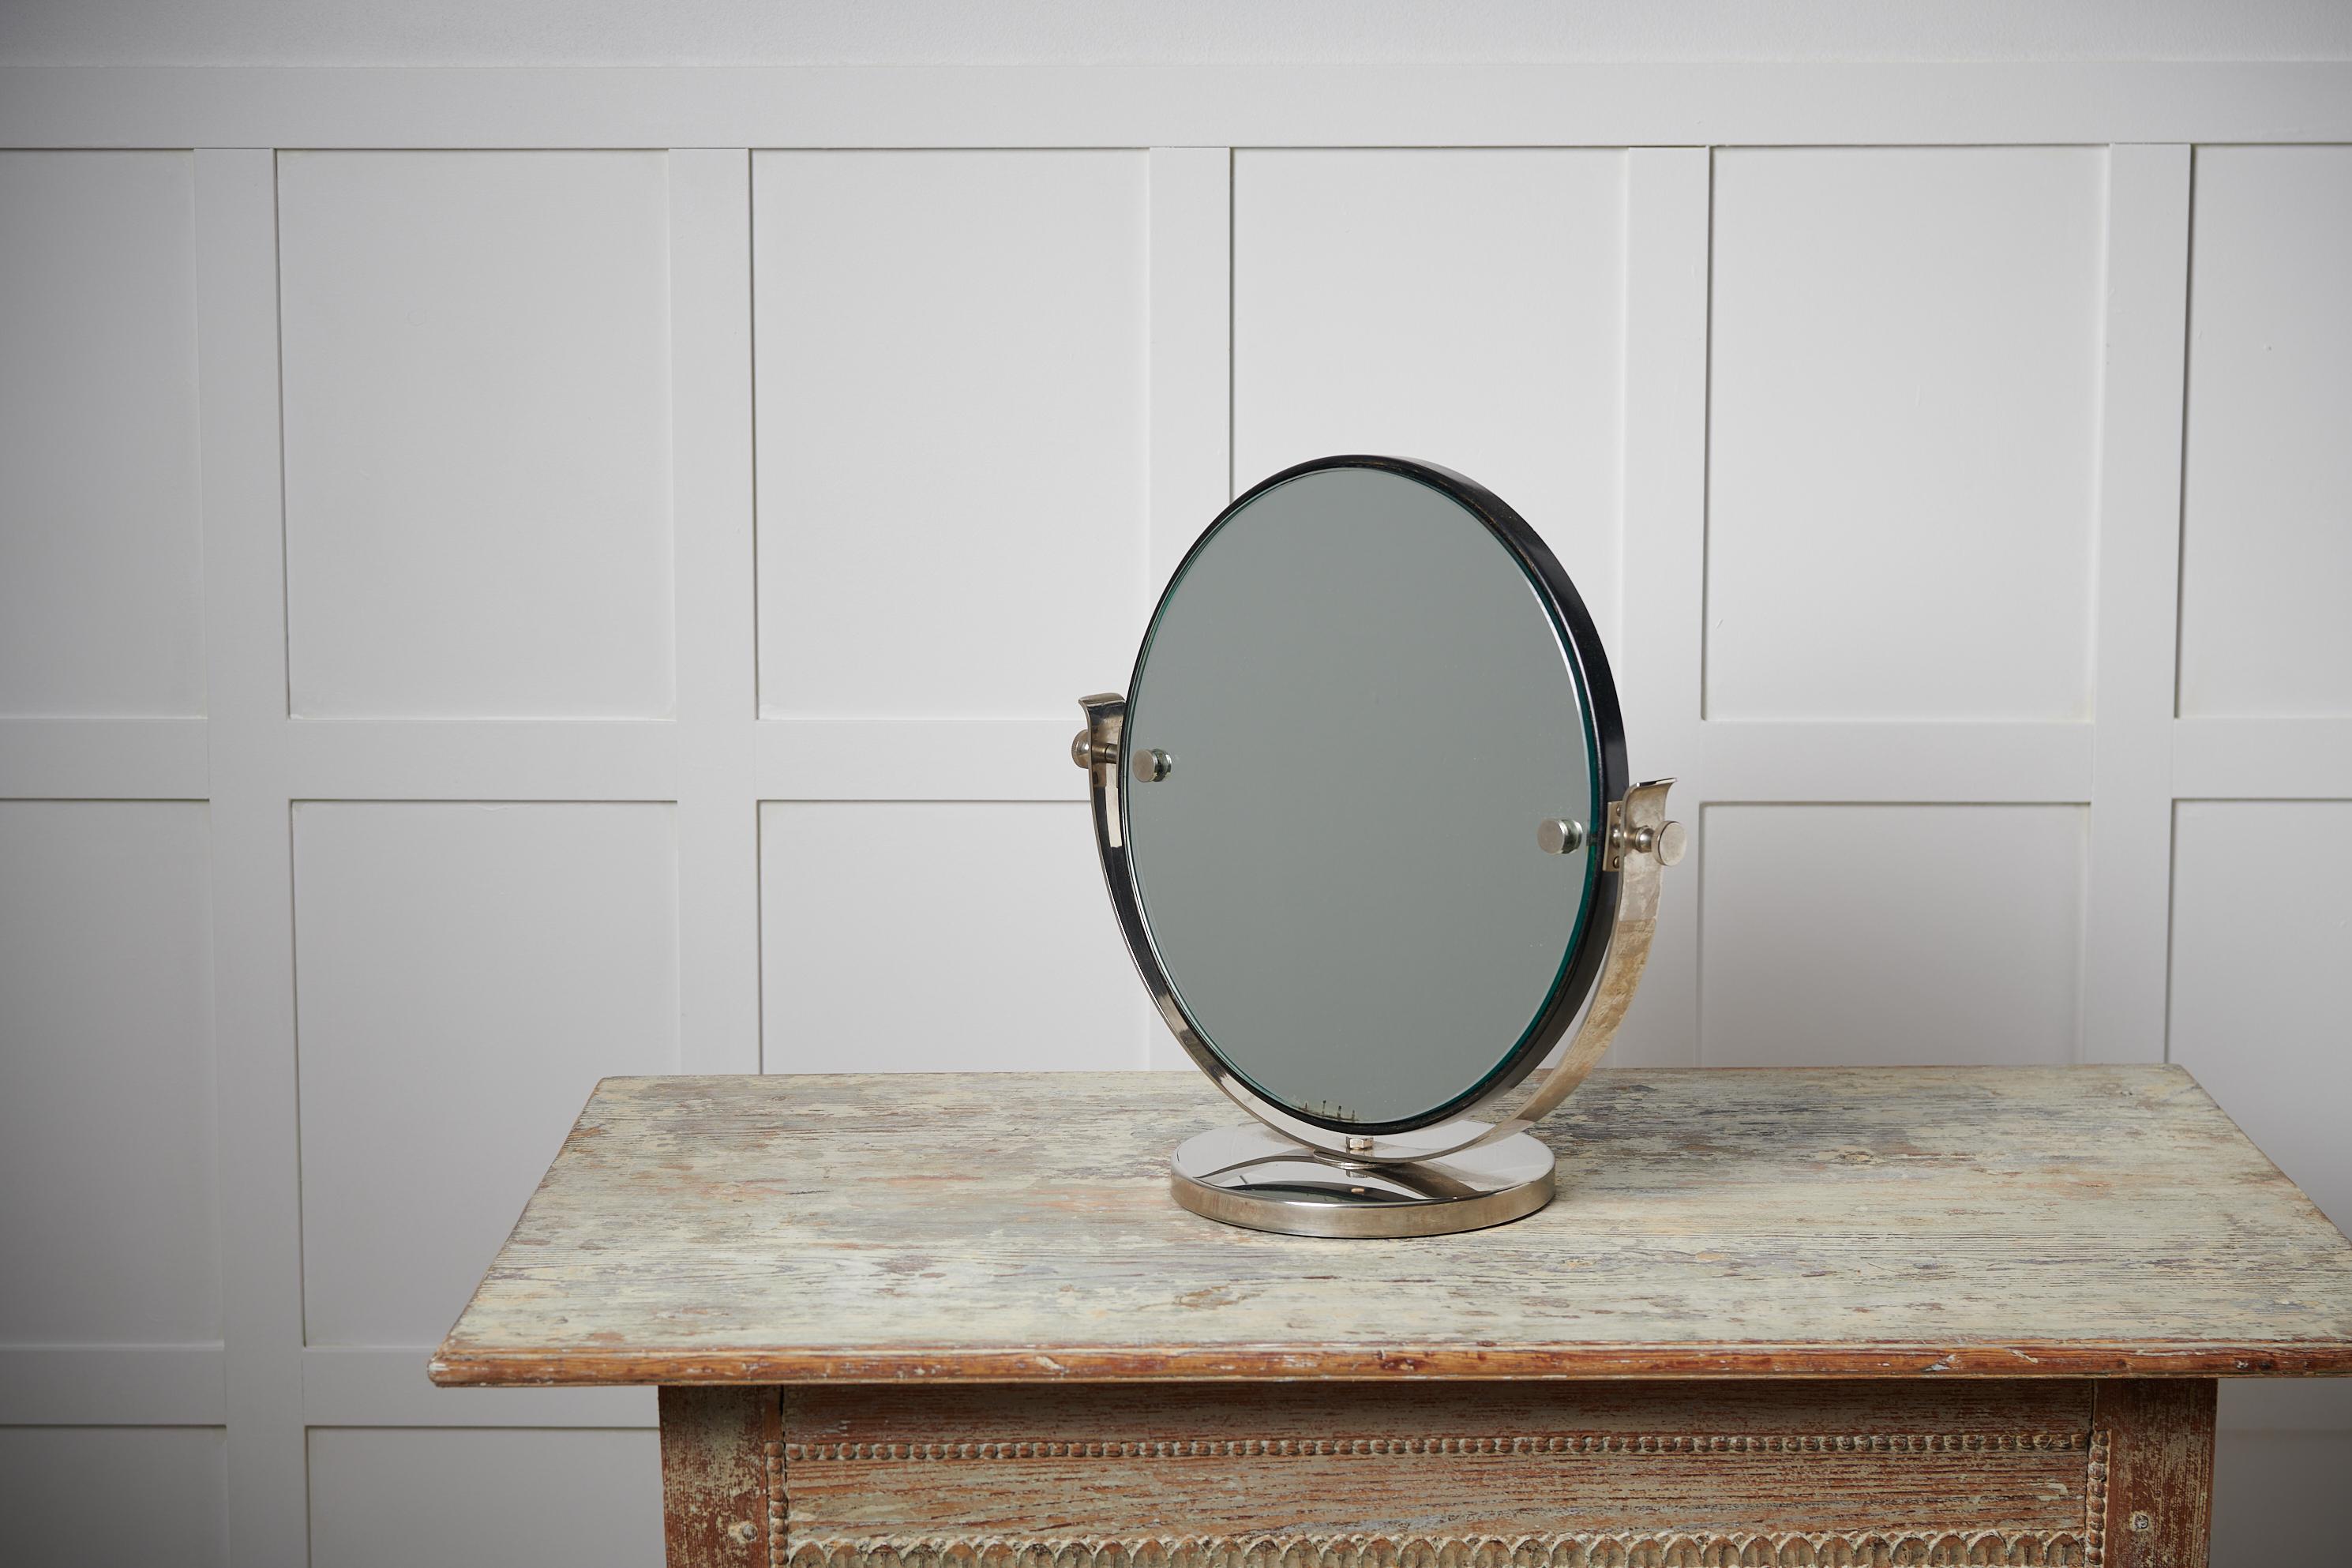 Art Deco table mirror from Sweden made around the 1930s. The mirror has a chromed frame and an adjustable mirror. Just a few years shy of an authentic antique this mirror has the charm of the Art Deco period while being fully functional and as